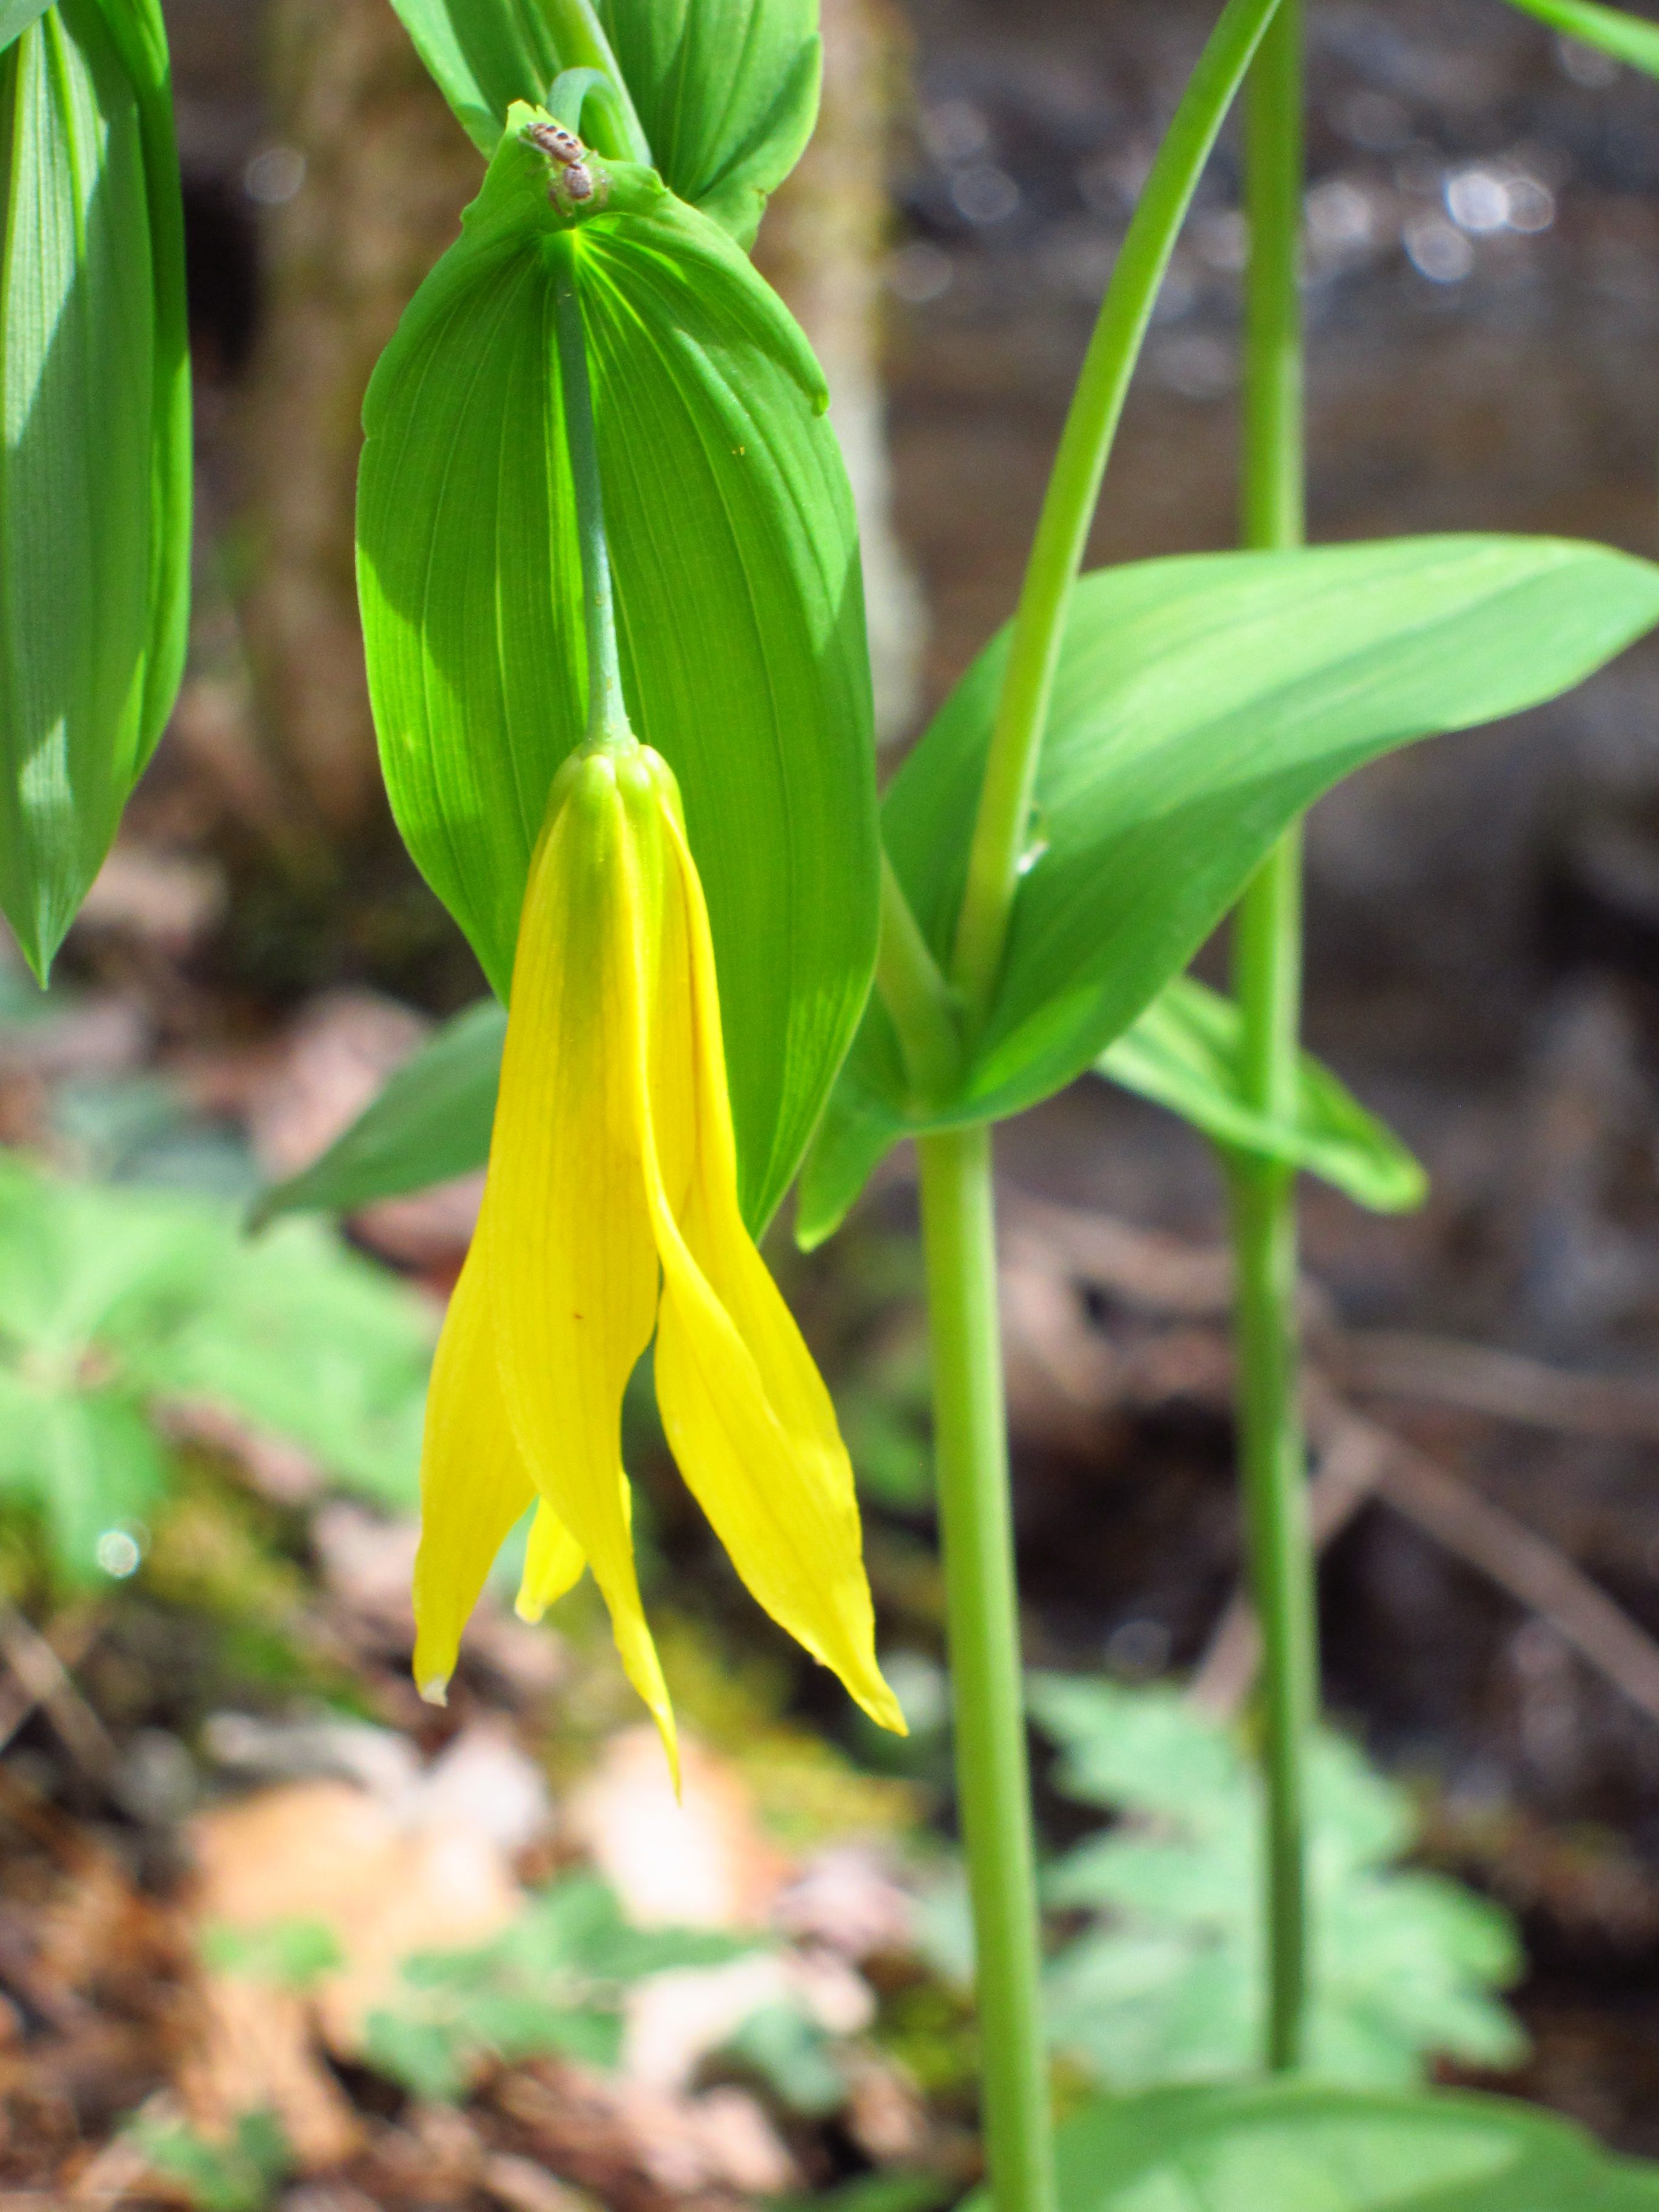 The Scientific Name is Uvularia grandiflora. You will likely hear them called Large-flowered Bellwort. This picture shows the Graceful Merrybell of Uvularia grandiflora